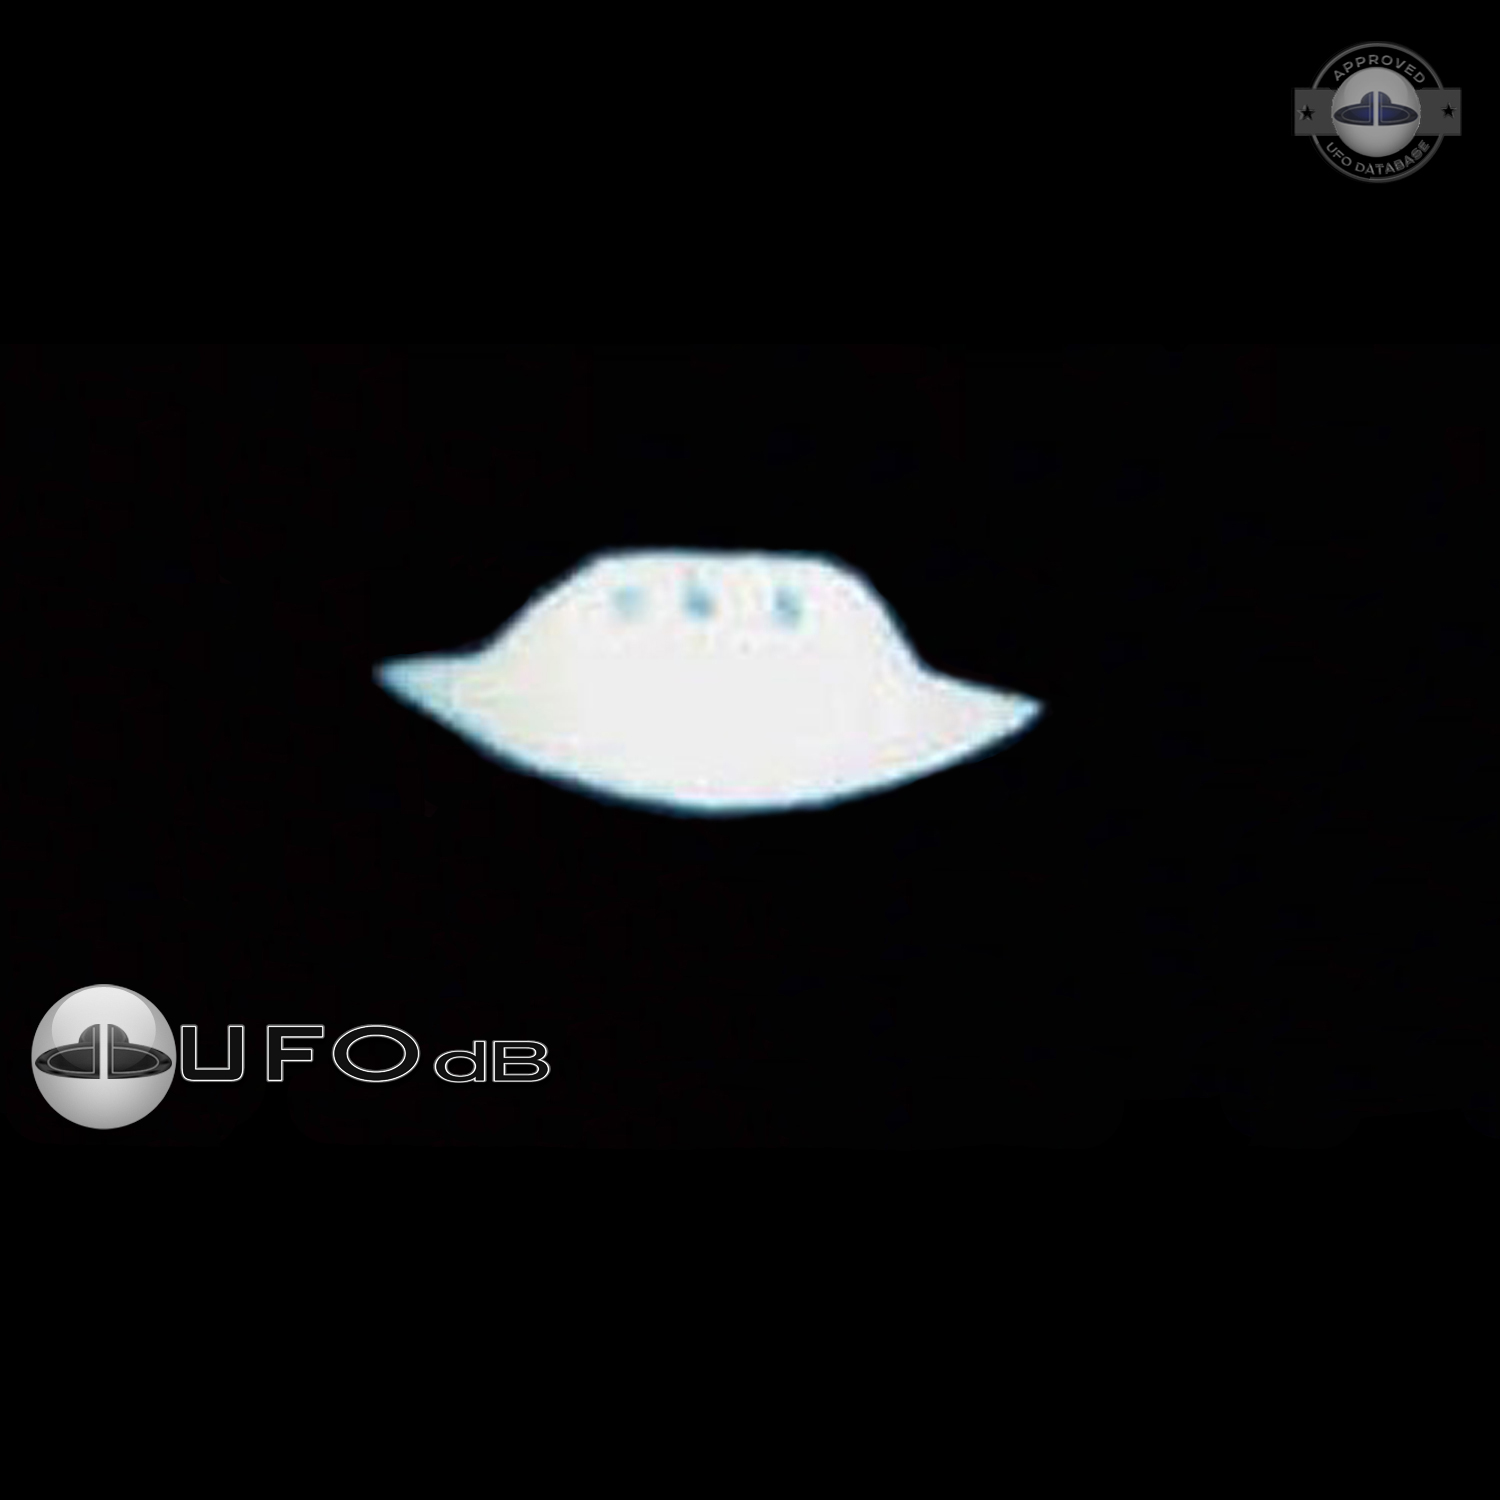 Iran 1978 UFO picture released under the Freedom of Information Act UFO Picture #231-1